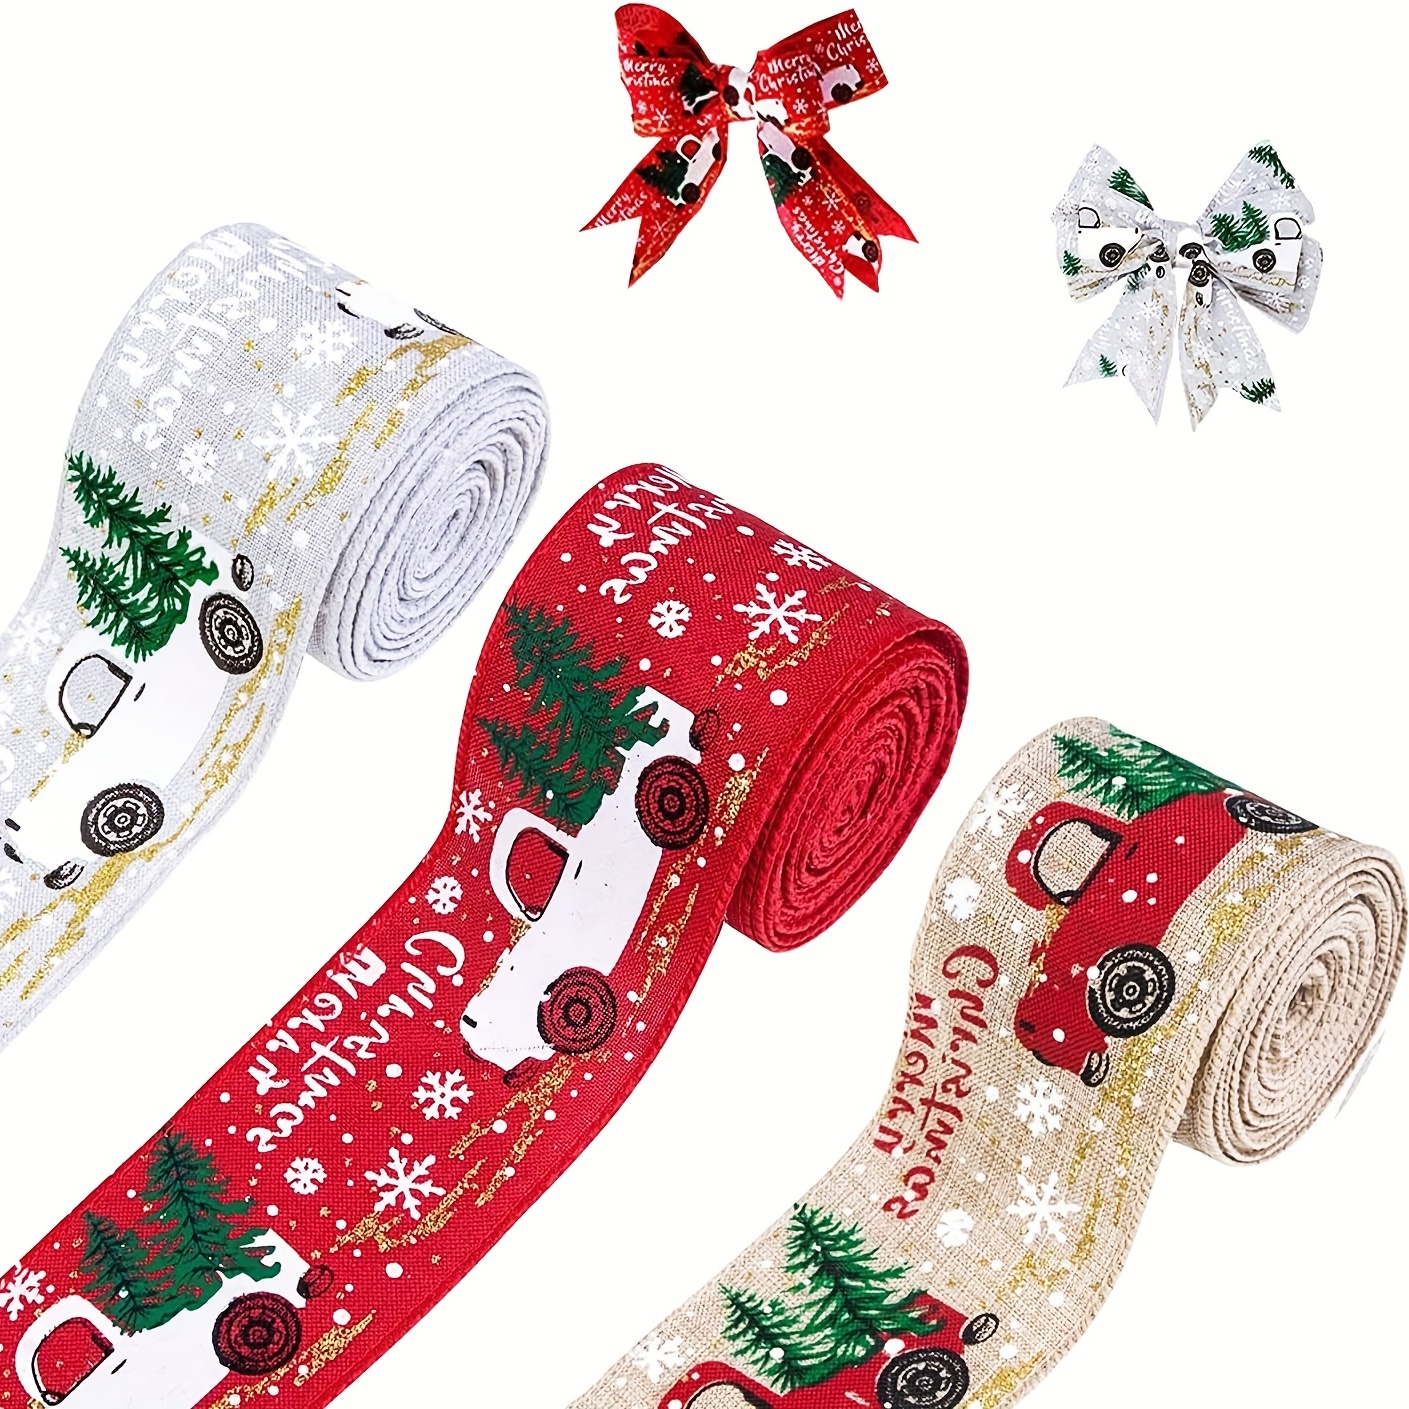 2 Rolls 2.5 Inch x 6 Yards Red and White Ribbon Christmas Wired Edge Ribbon  DIY Craft Ribbon for Christmas Tree Decorations Wreath Bows Wrapping